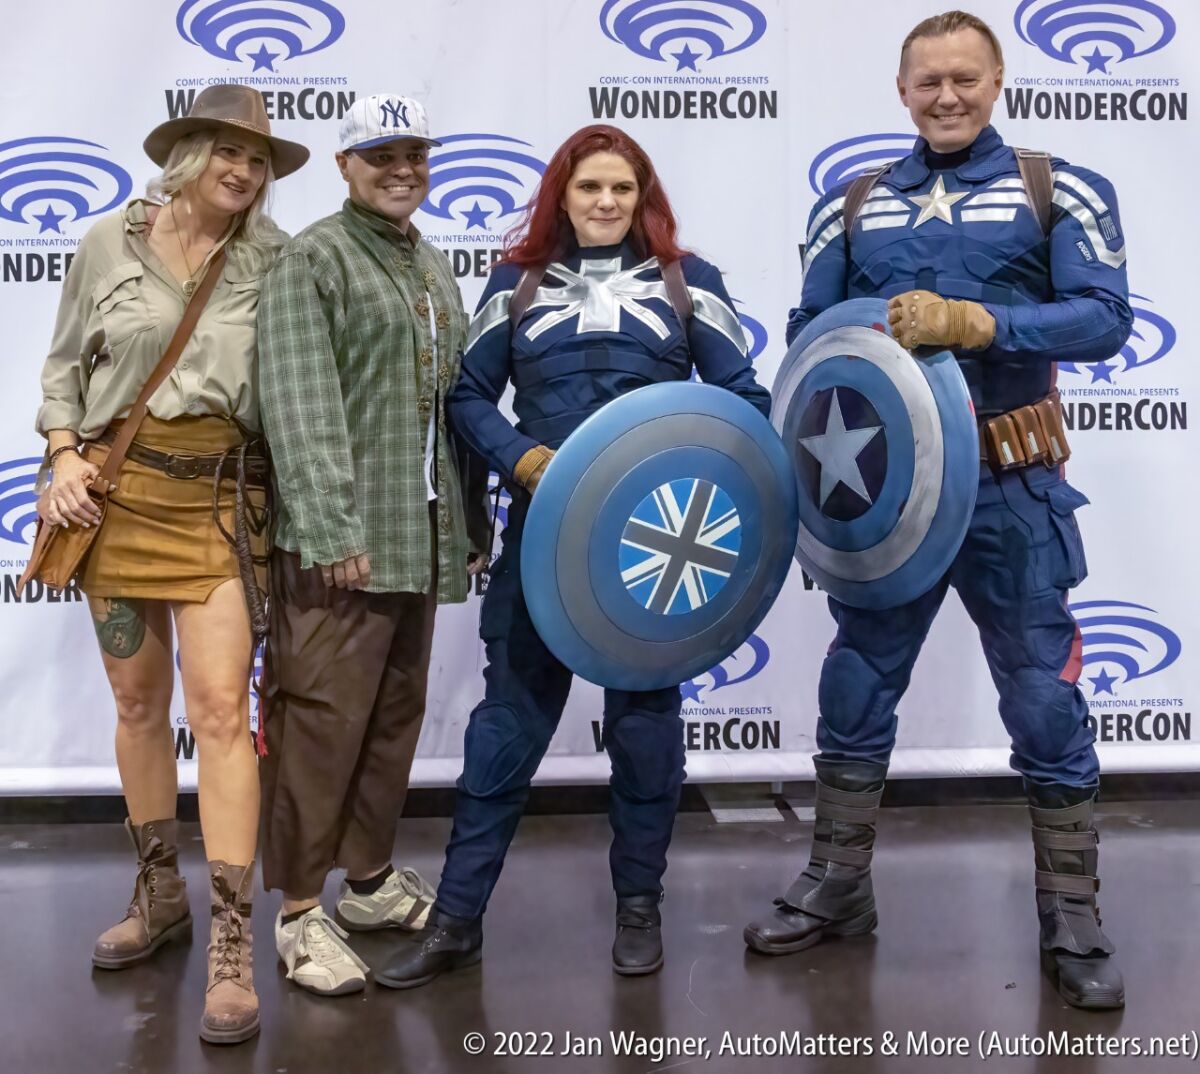 Attendees posing for a WonderCon photo